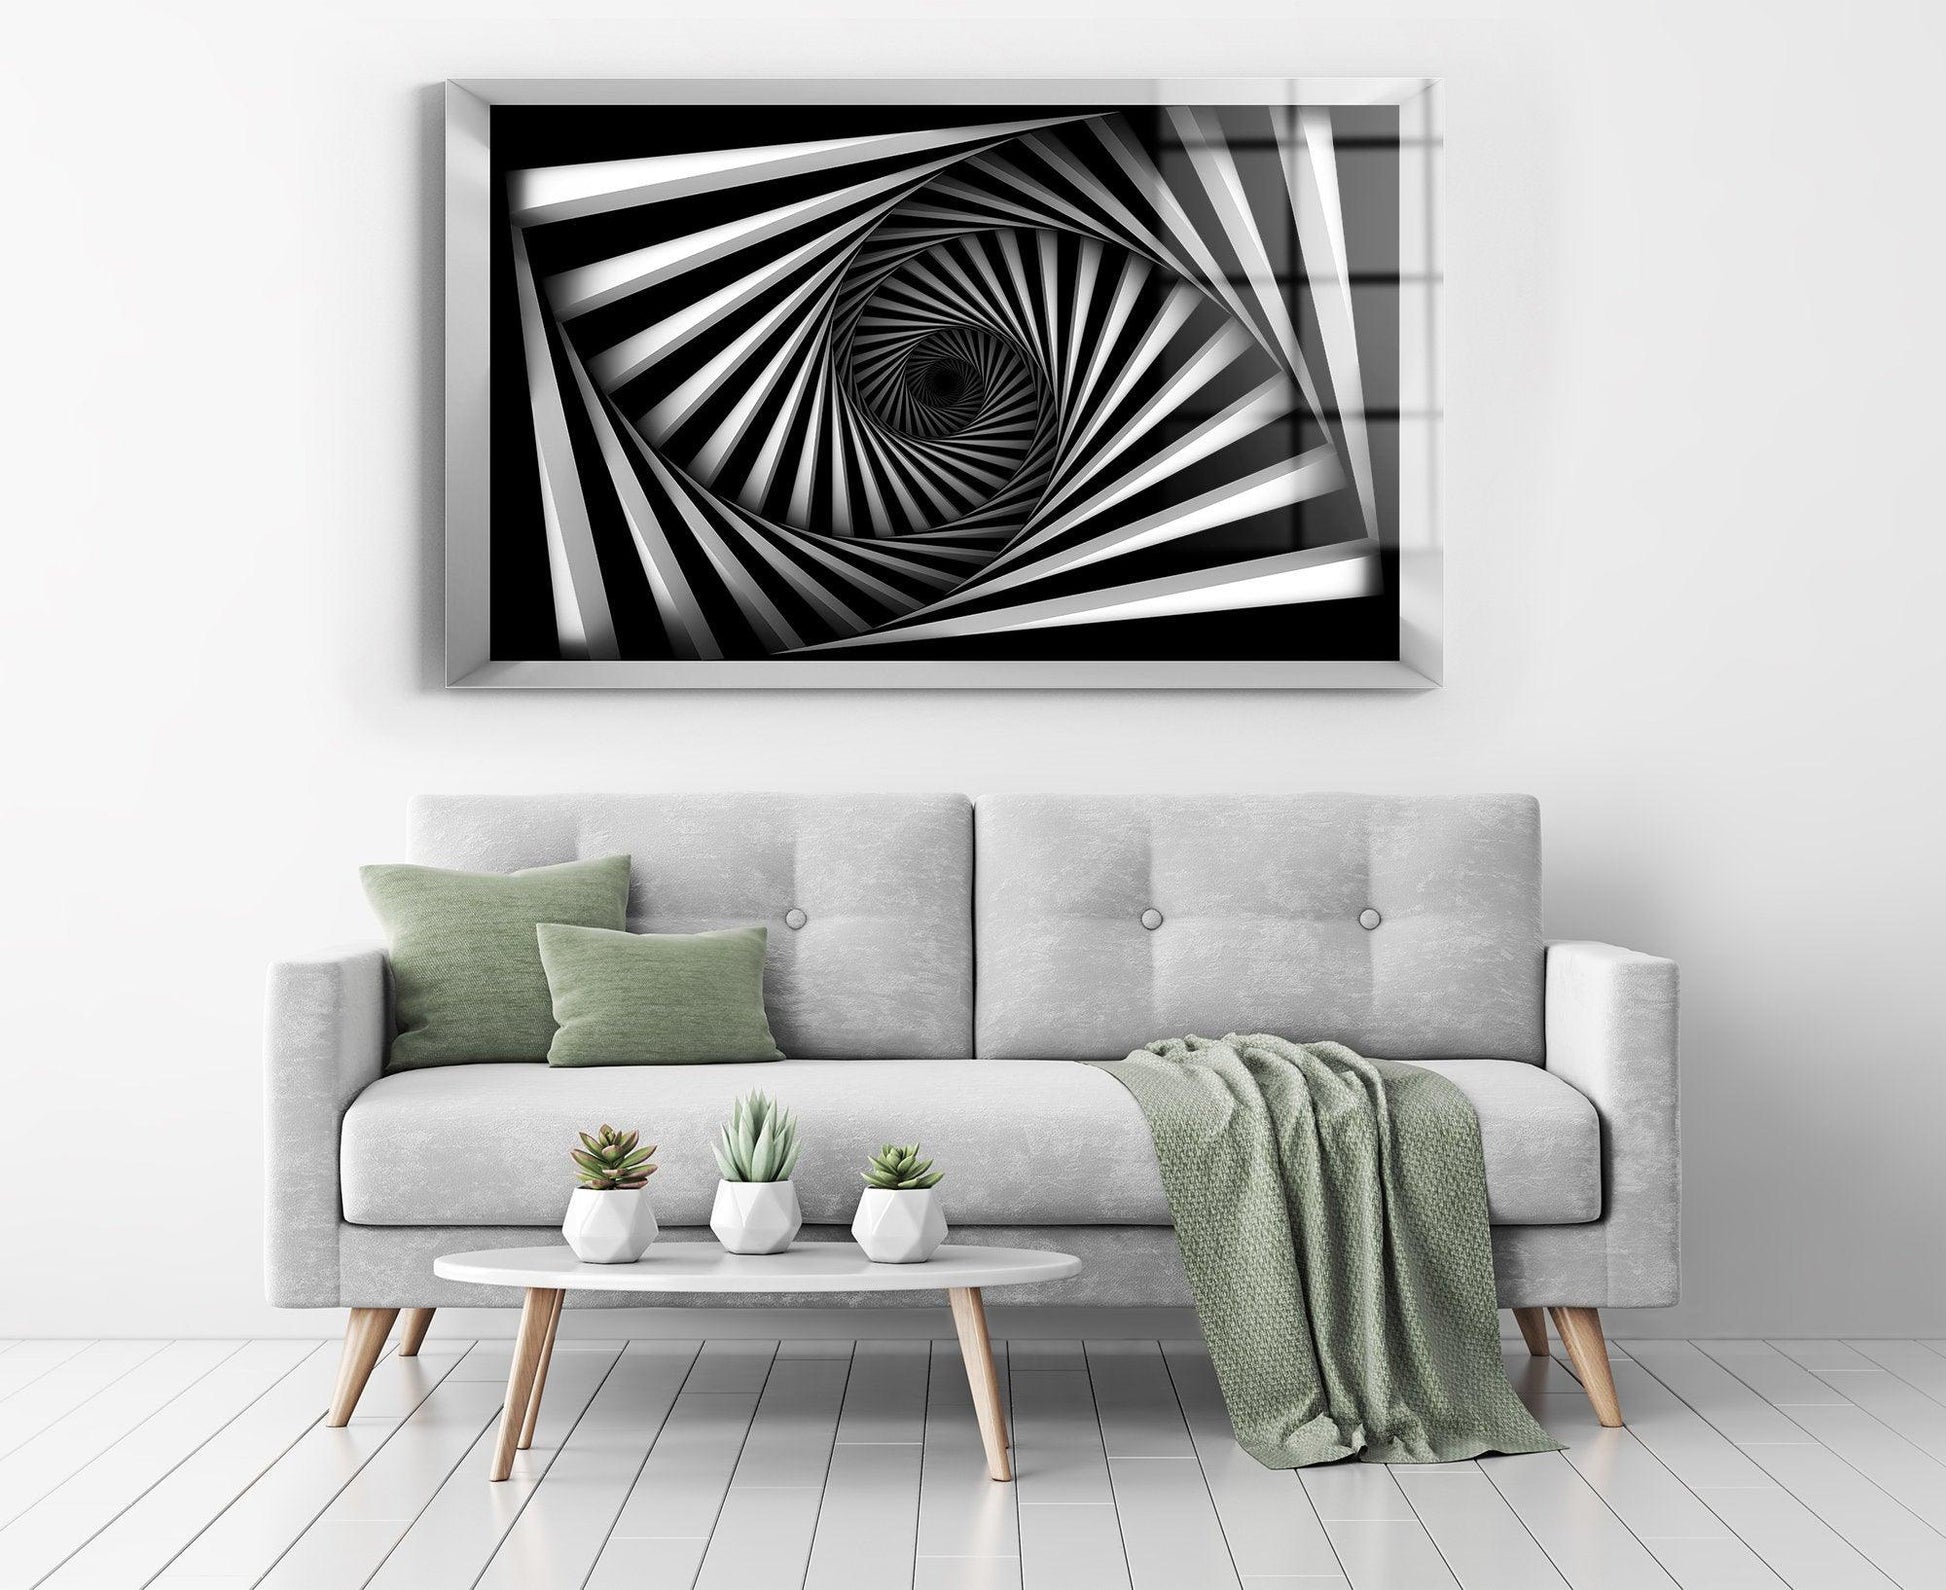 Psychedelic Vector glass wall art| black white wall art, Retro Wavy Lines, black white wall art, abstract background glass wall art - TrendiArt